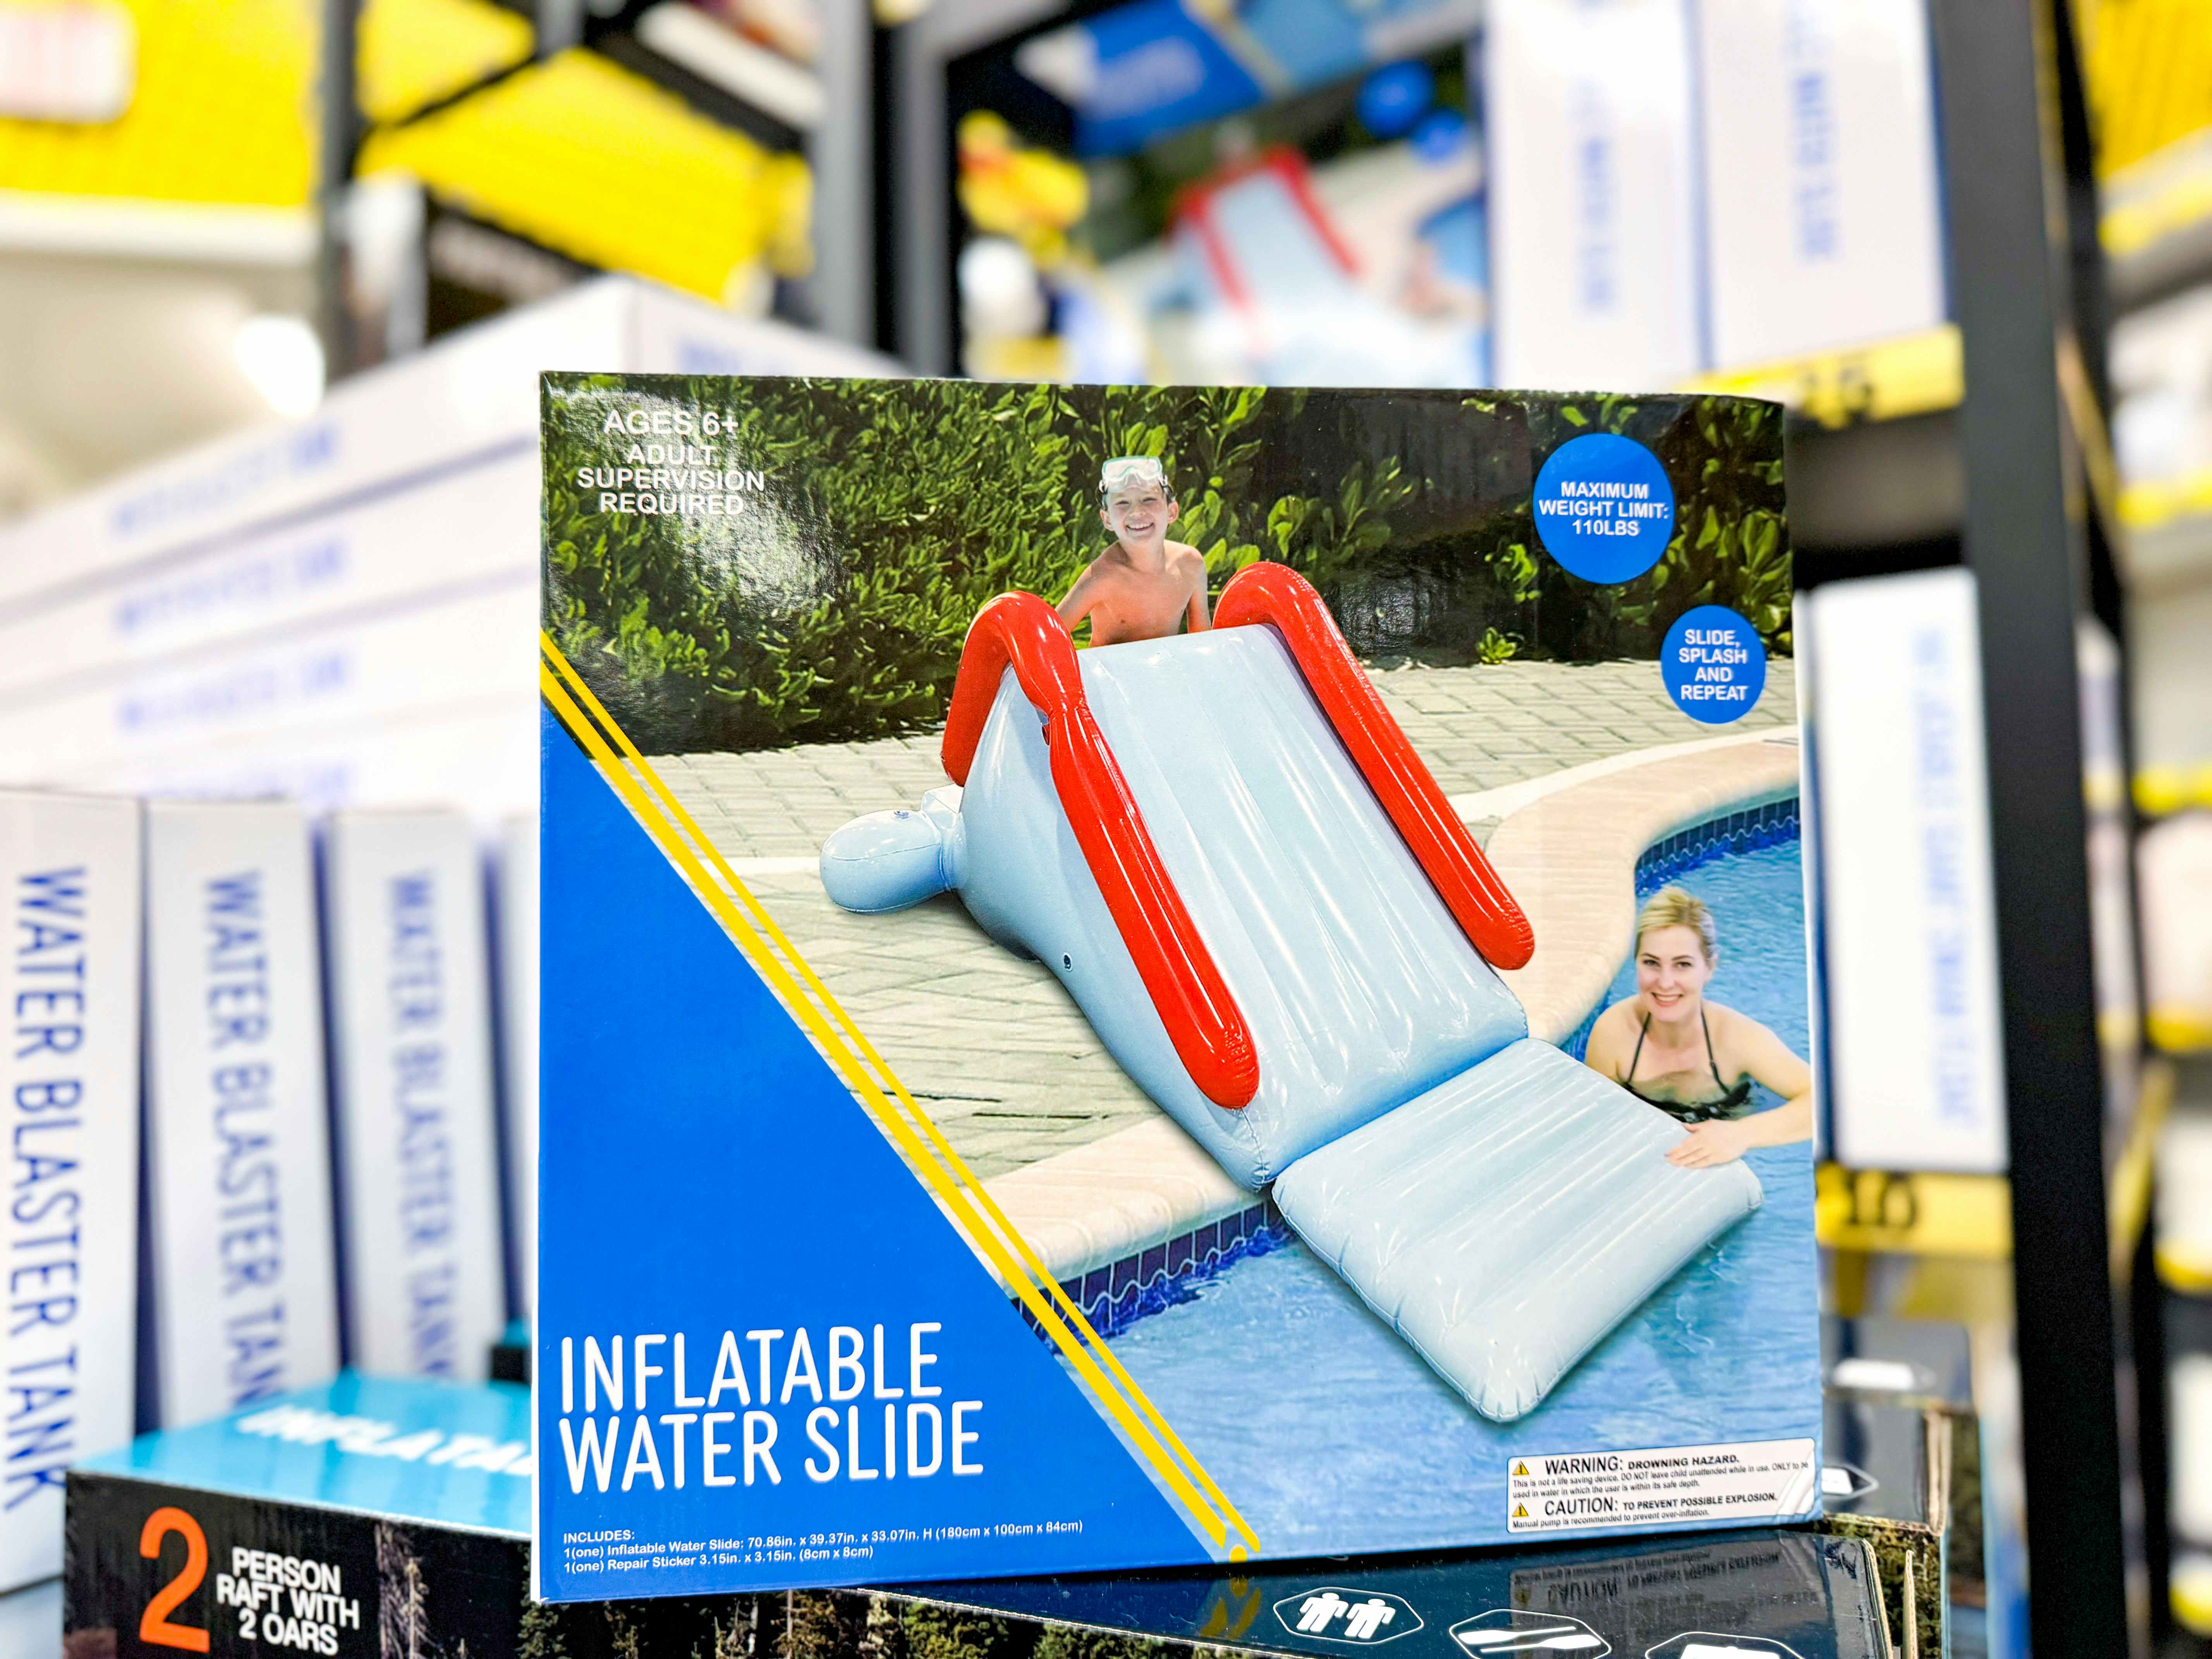 $20 Inflatable Projector Screen and $25 Water Slide at Five Below